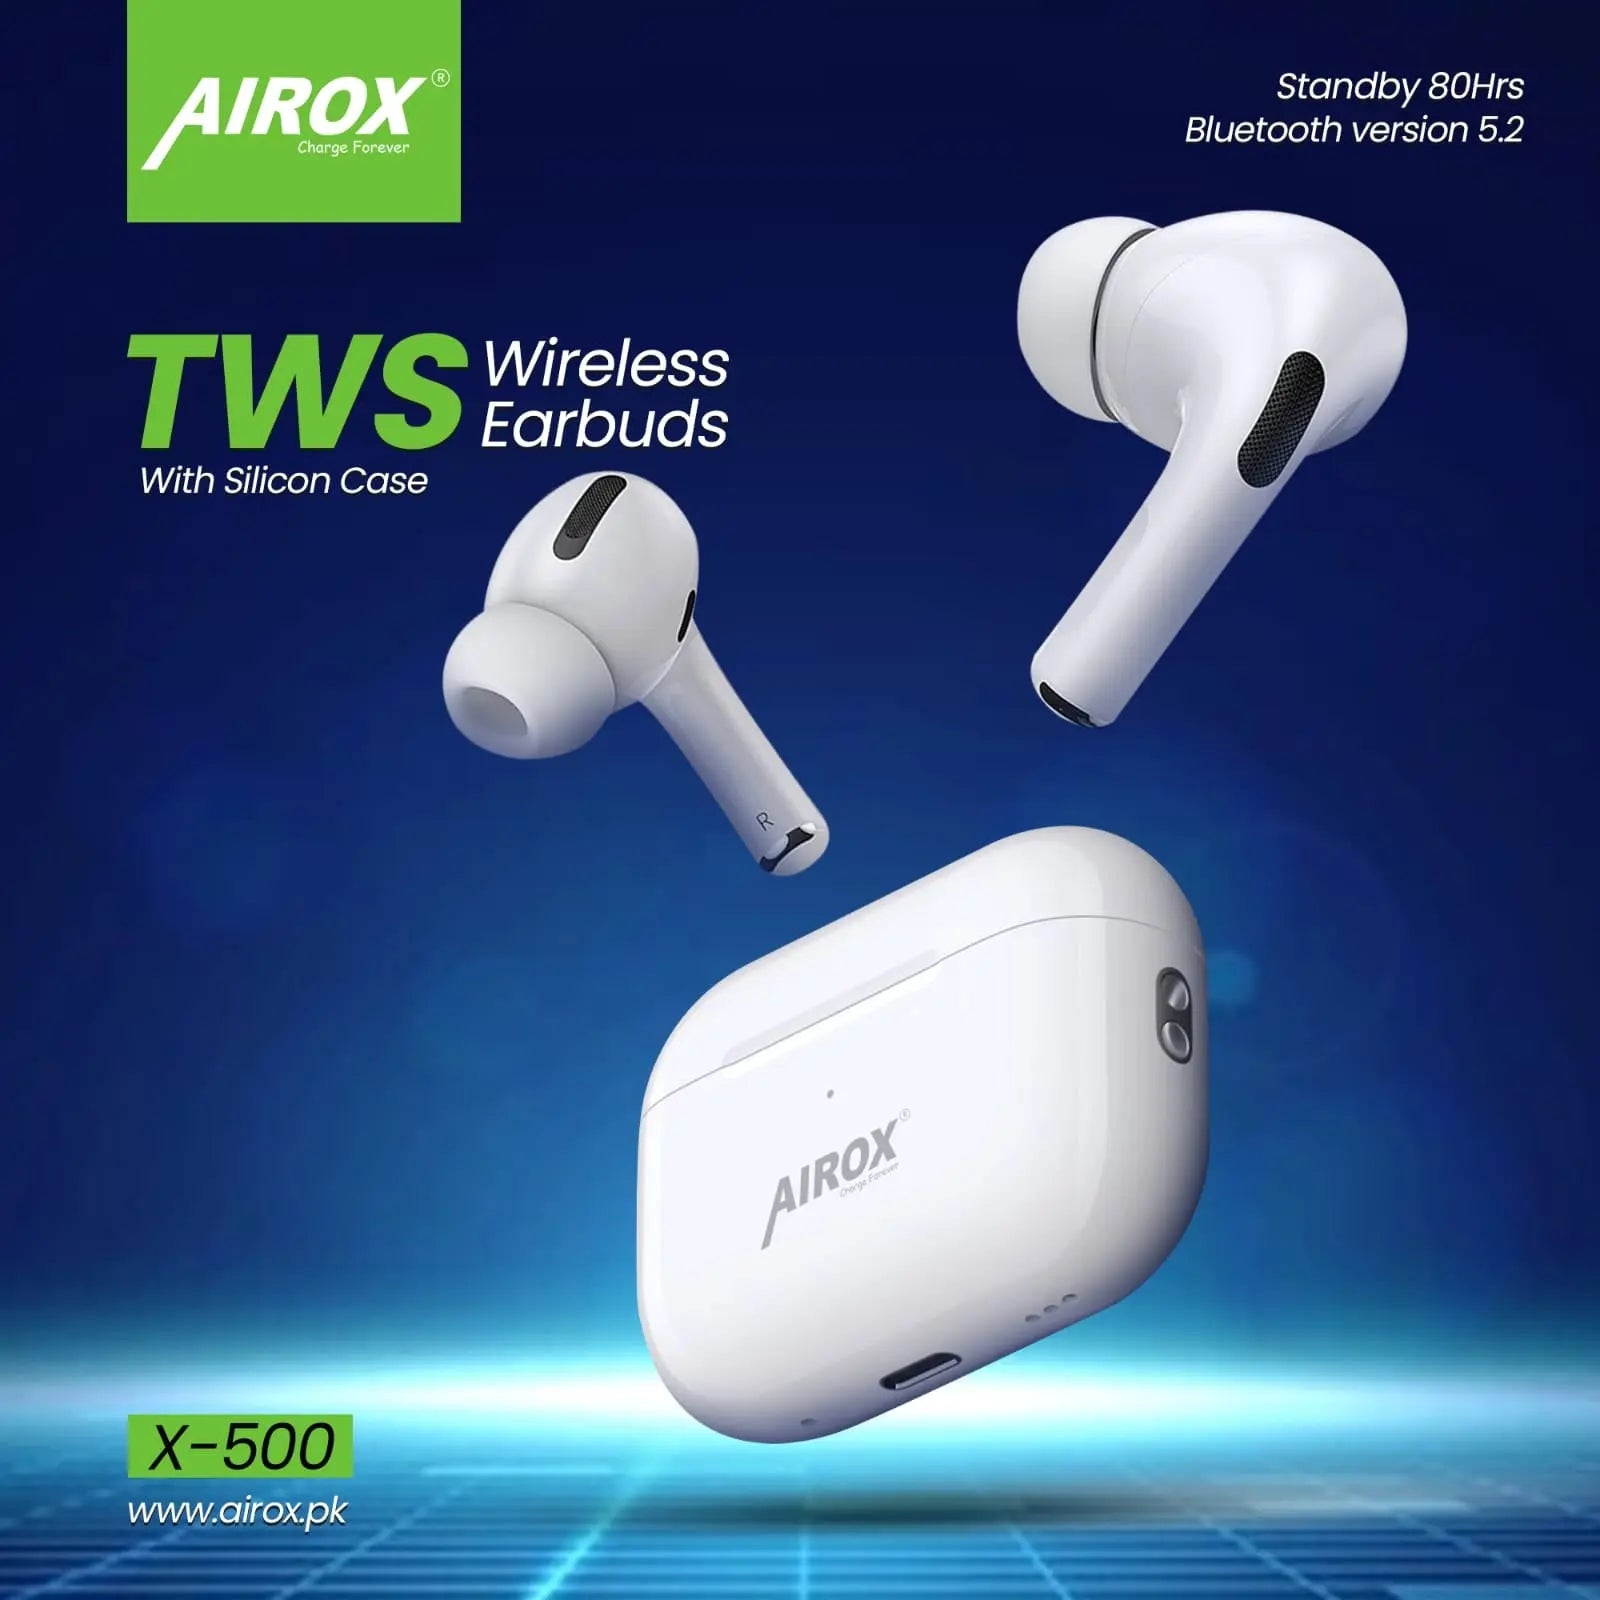 Airox X500 Airpods Pro Price in Pakistan | 5.0 Bluetooth Version | Premium Quality with Super Bass - Airox.pk